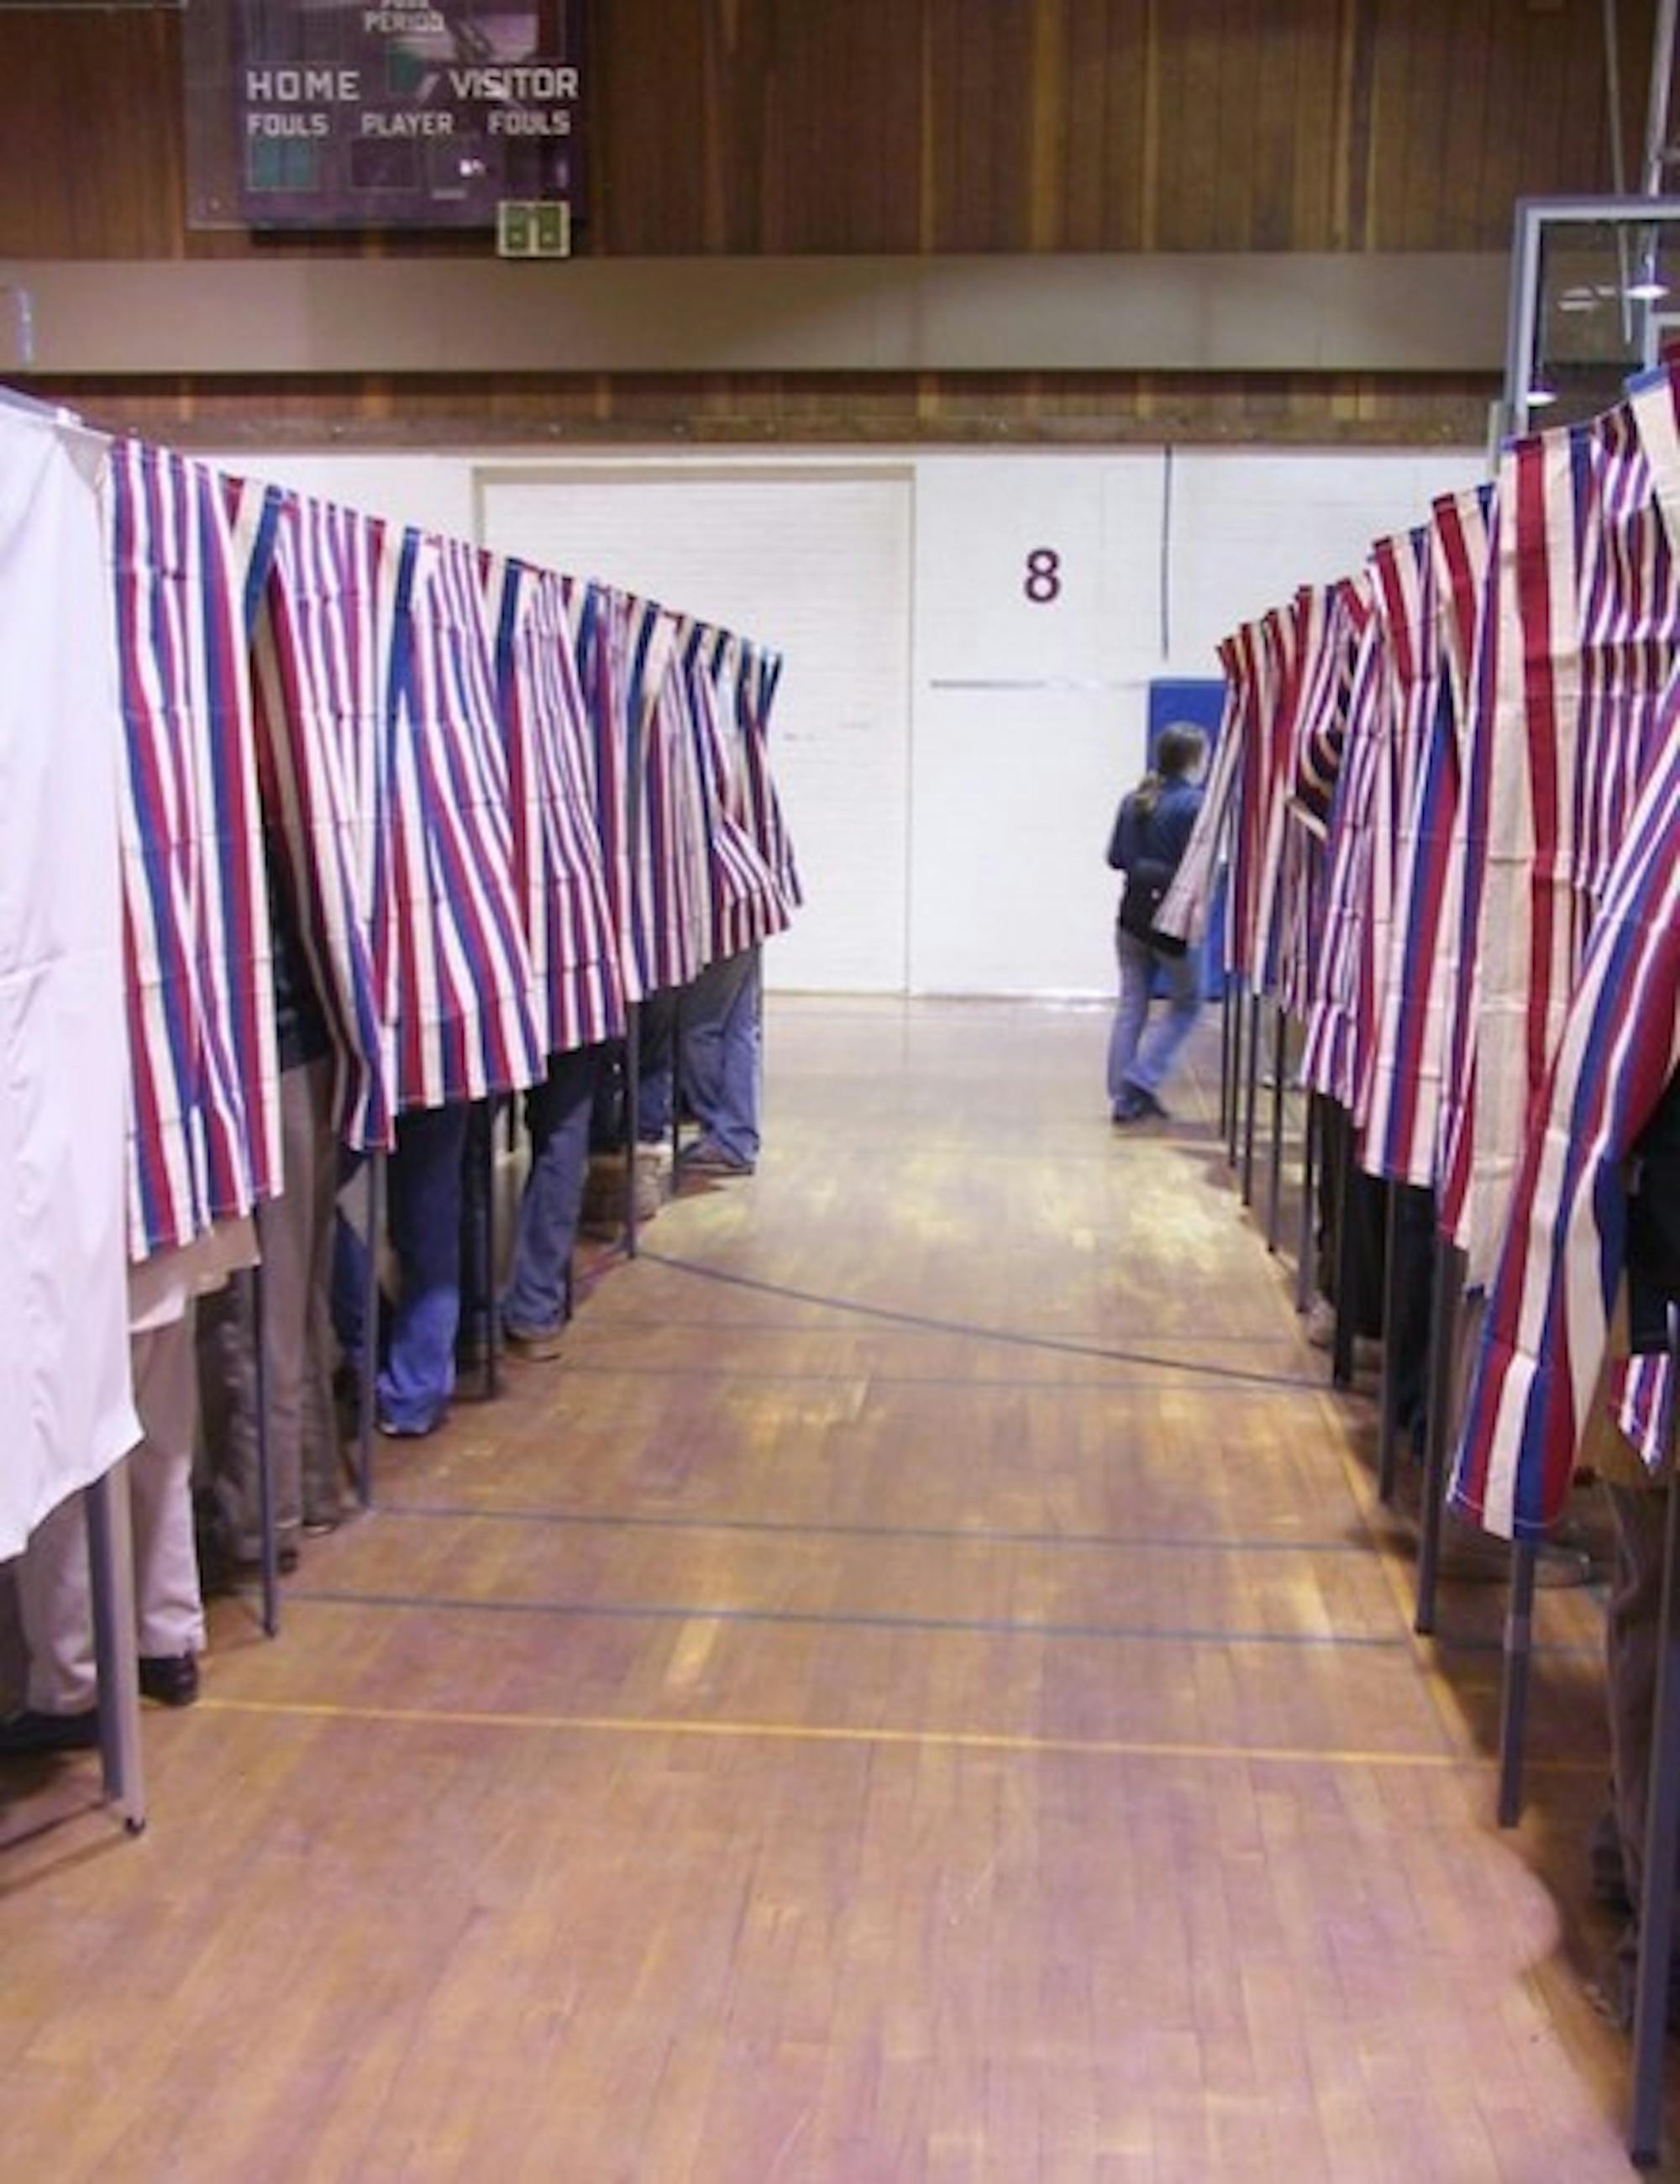 Citizens vote in the 2004 national election at the local polls at Hanover High School. The polling place has moved to Richmond Middle School this year.